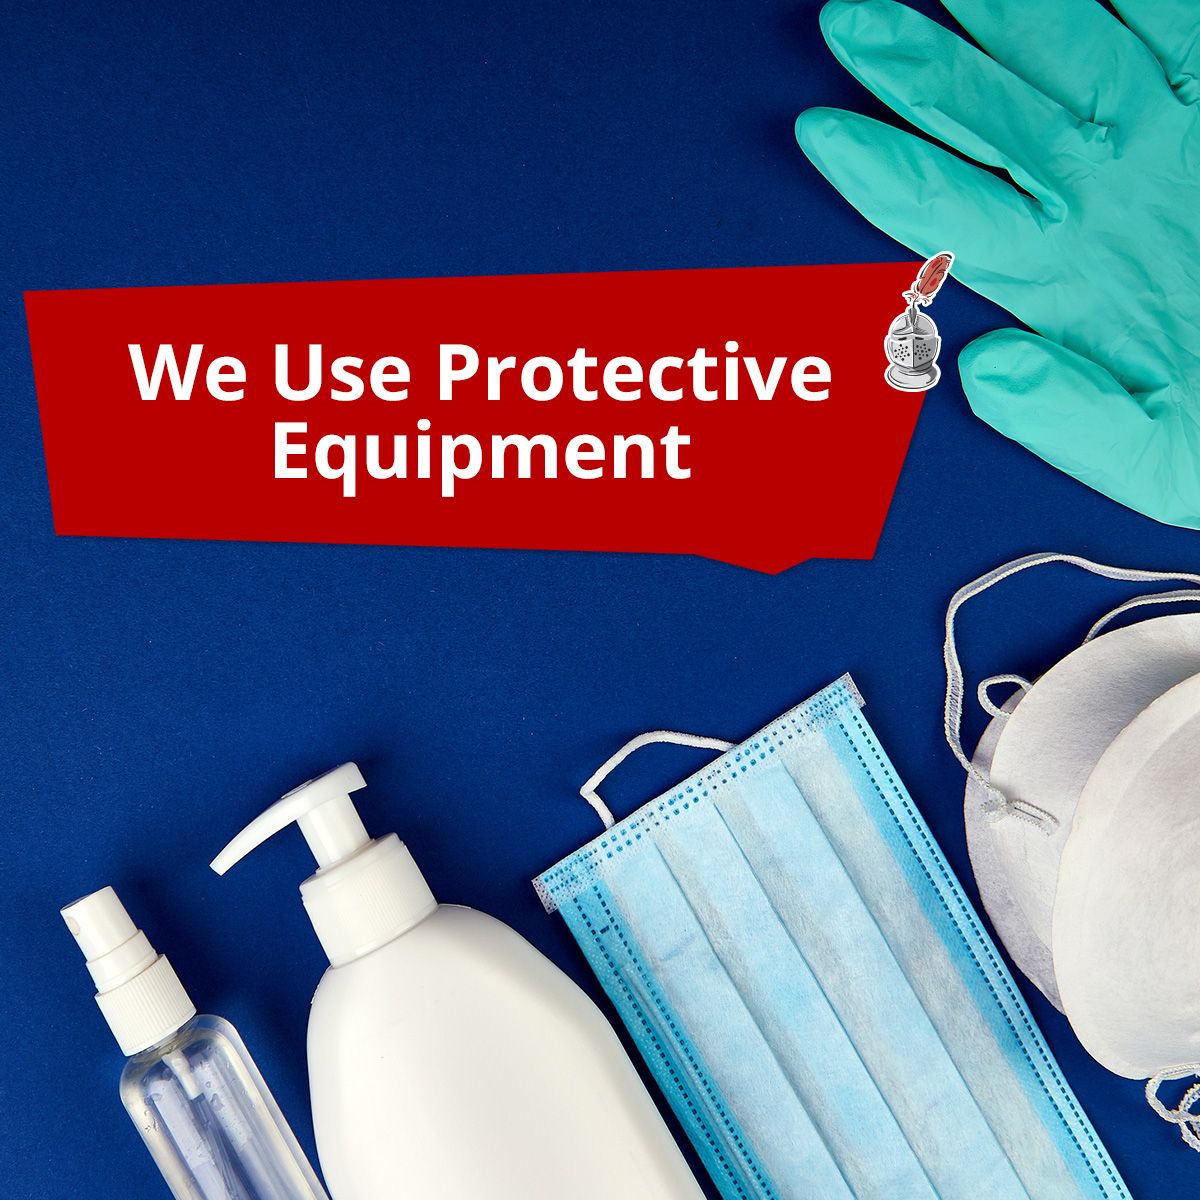 We Use Protective Equipment